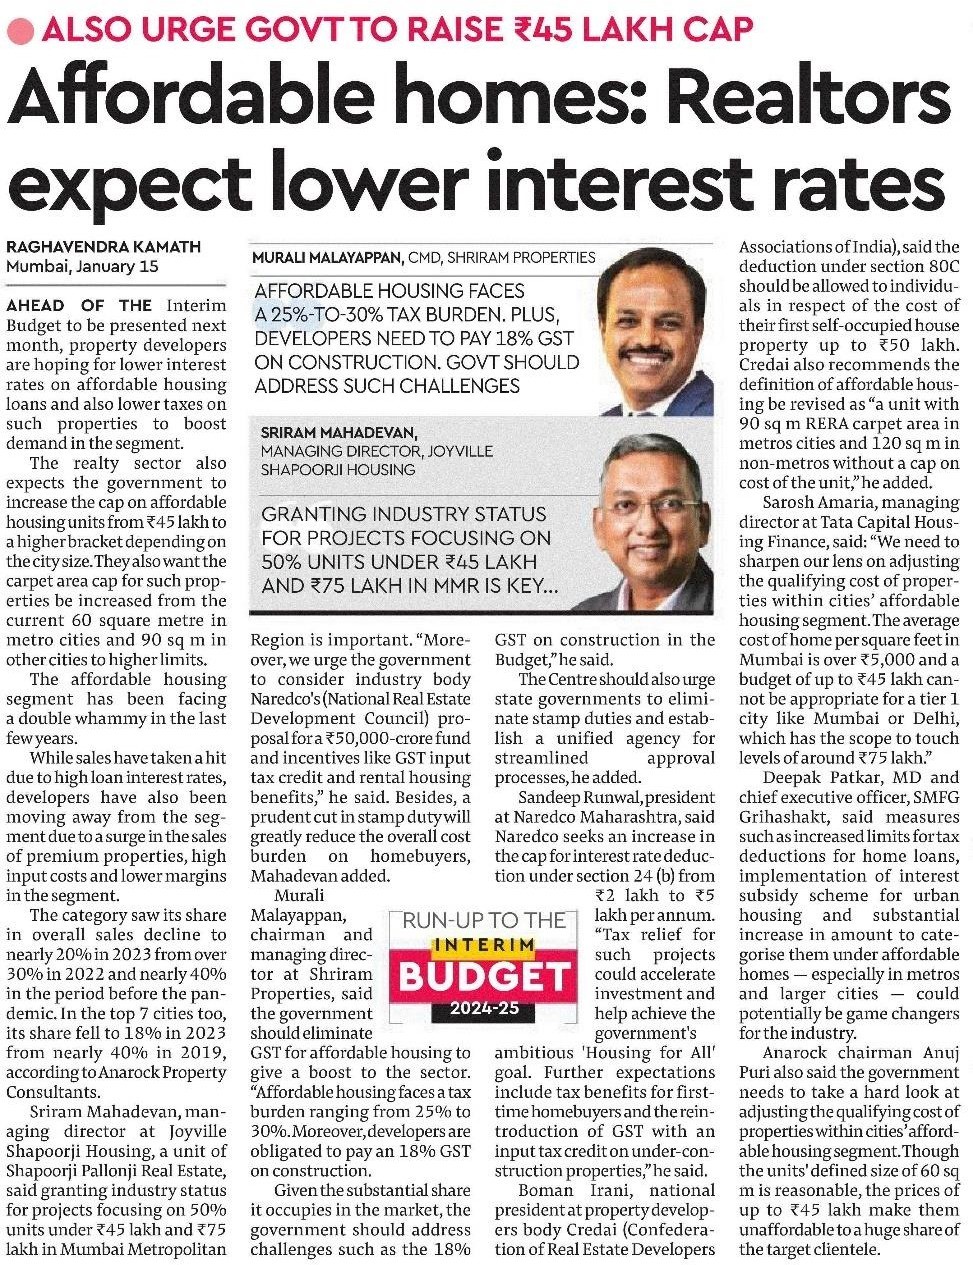 Affordable Homes; Realtors Expect Lower Interest Rates.